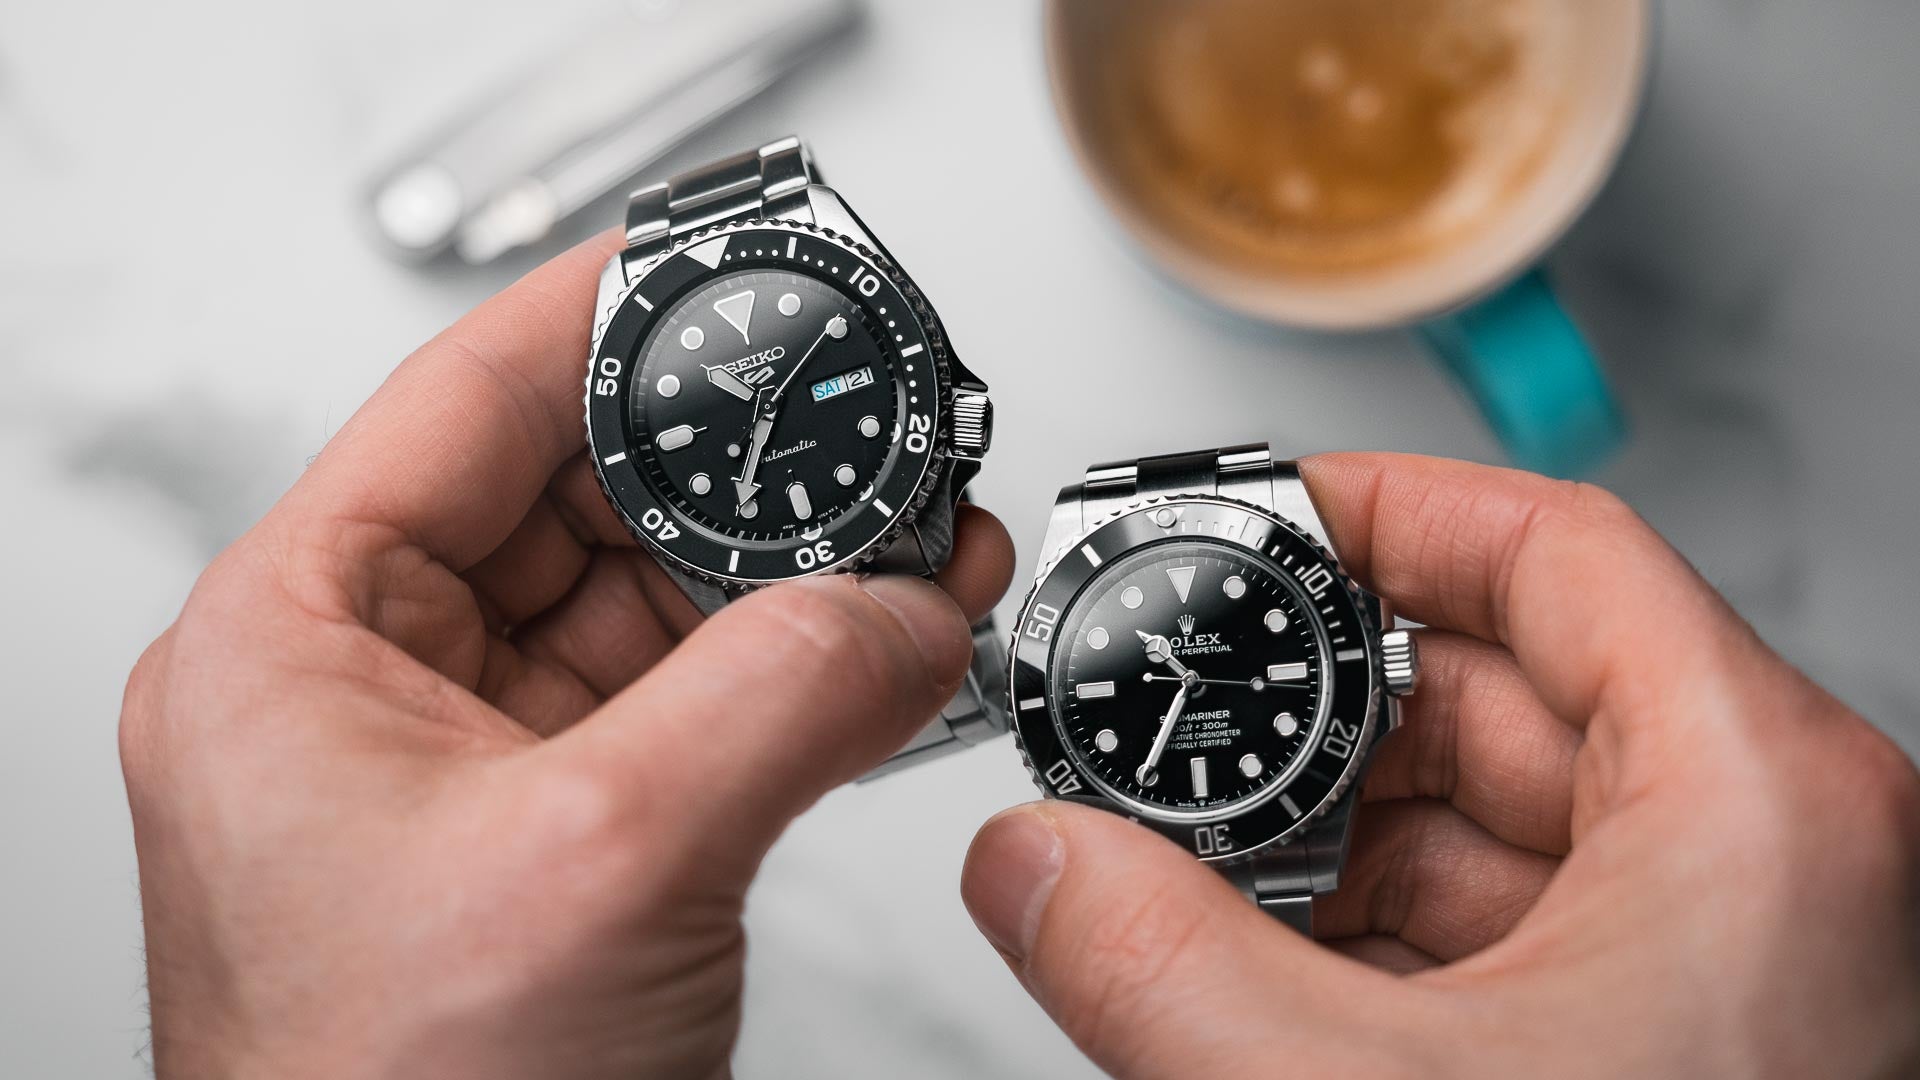 £250 Vs £6500 - Affordable or Luxury Watch